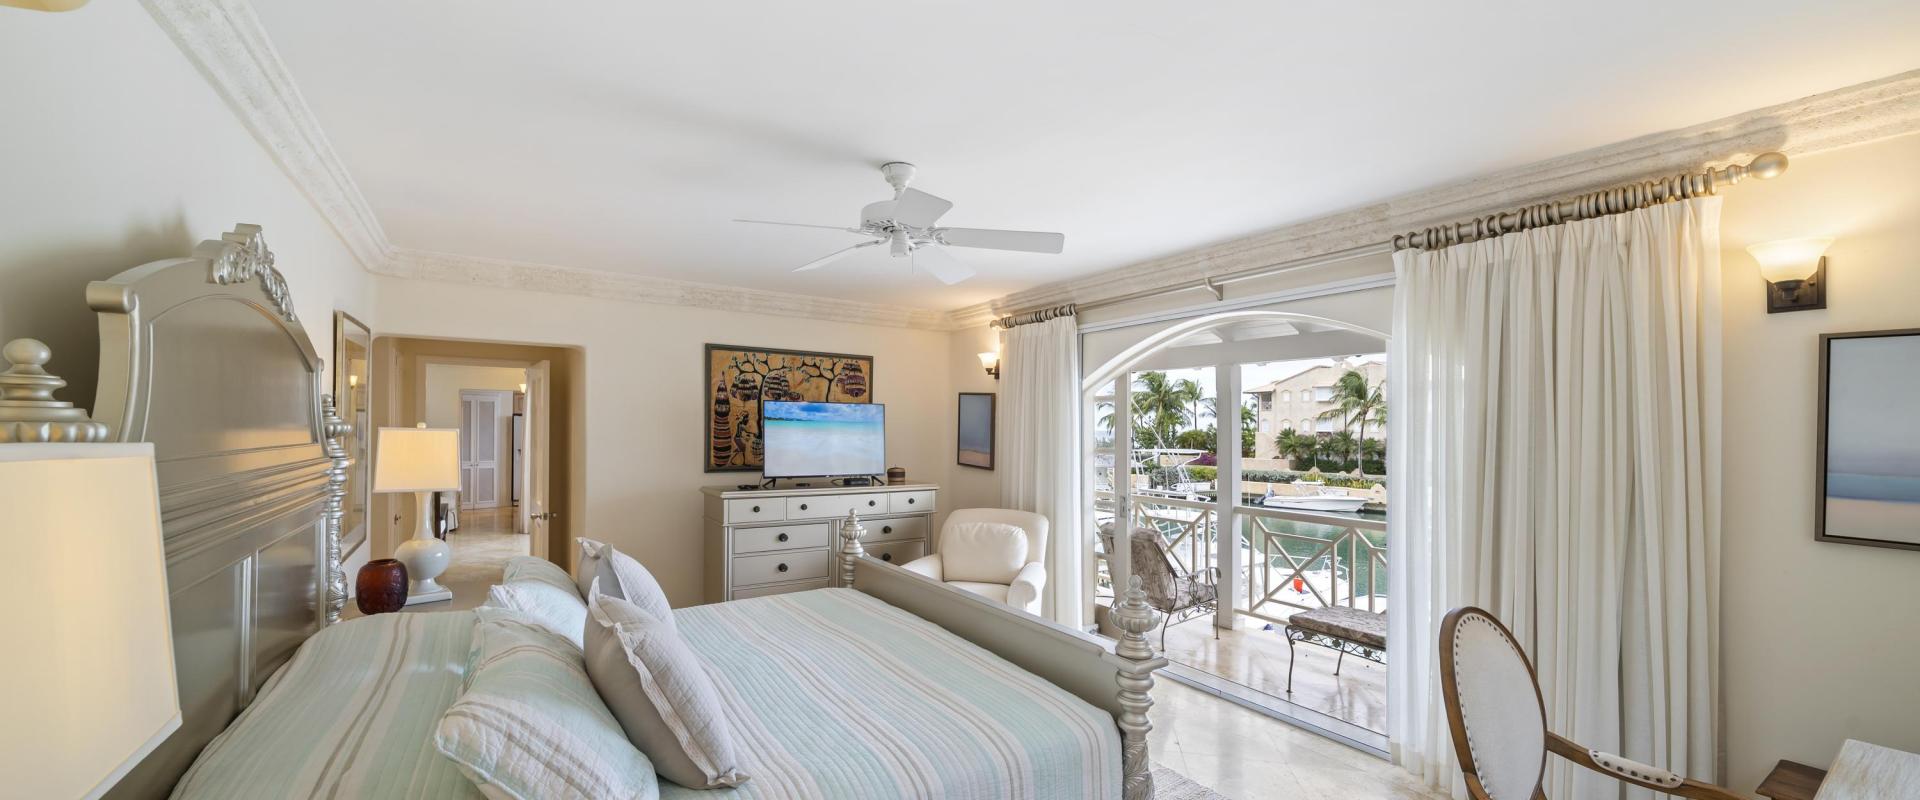 Rental Condo 266 Port St. Charles Barbados Master Bedroom with King Bed